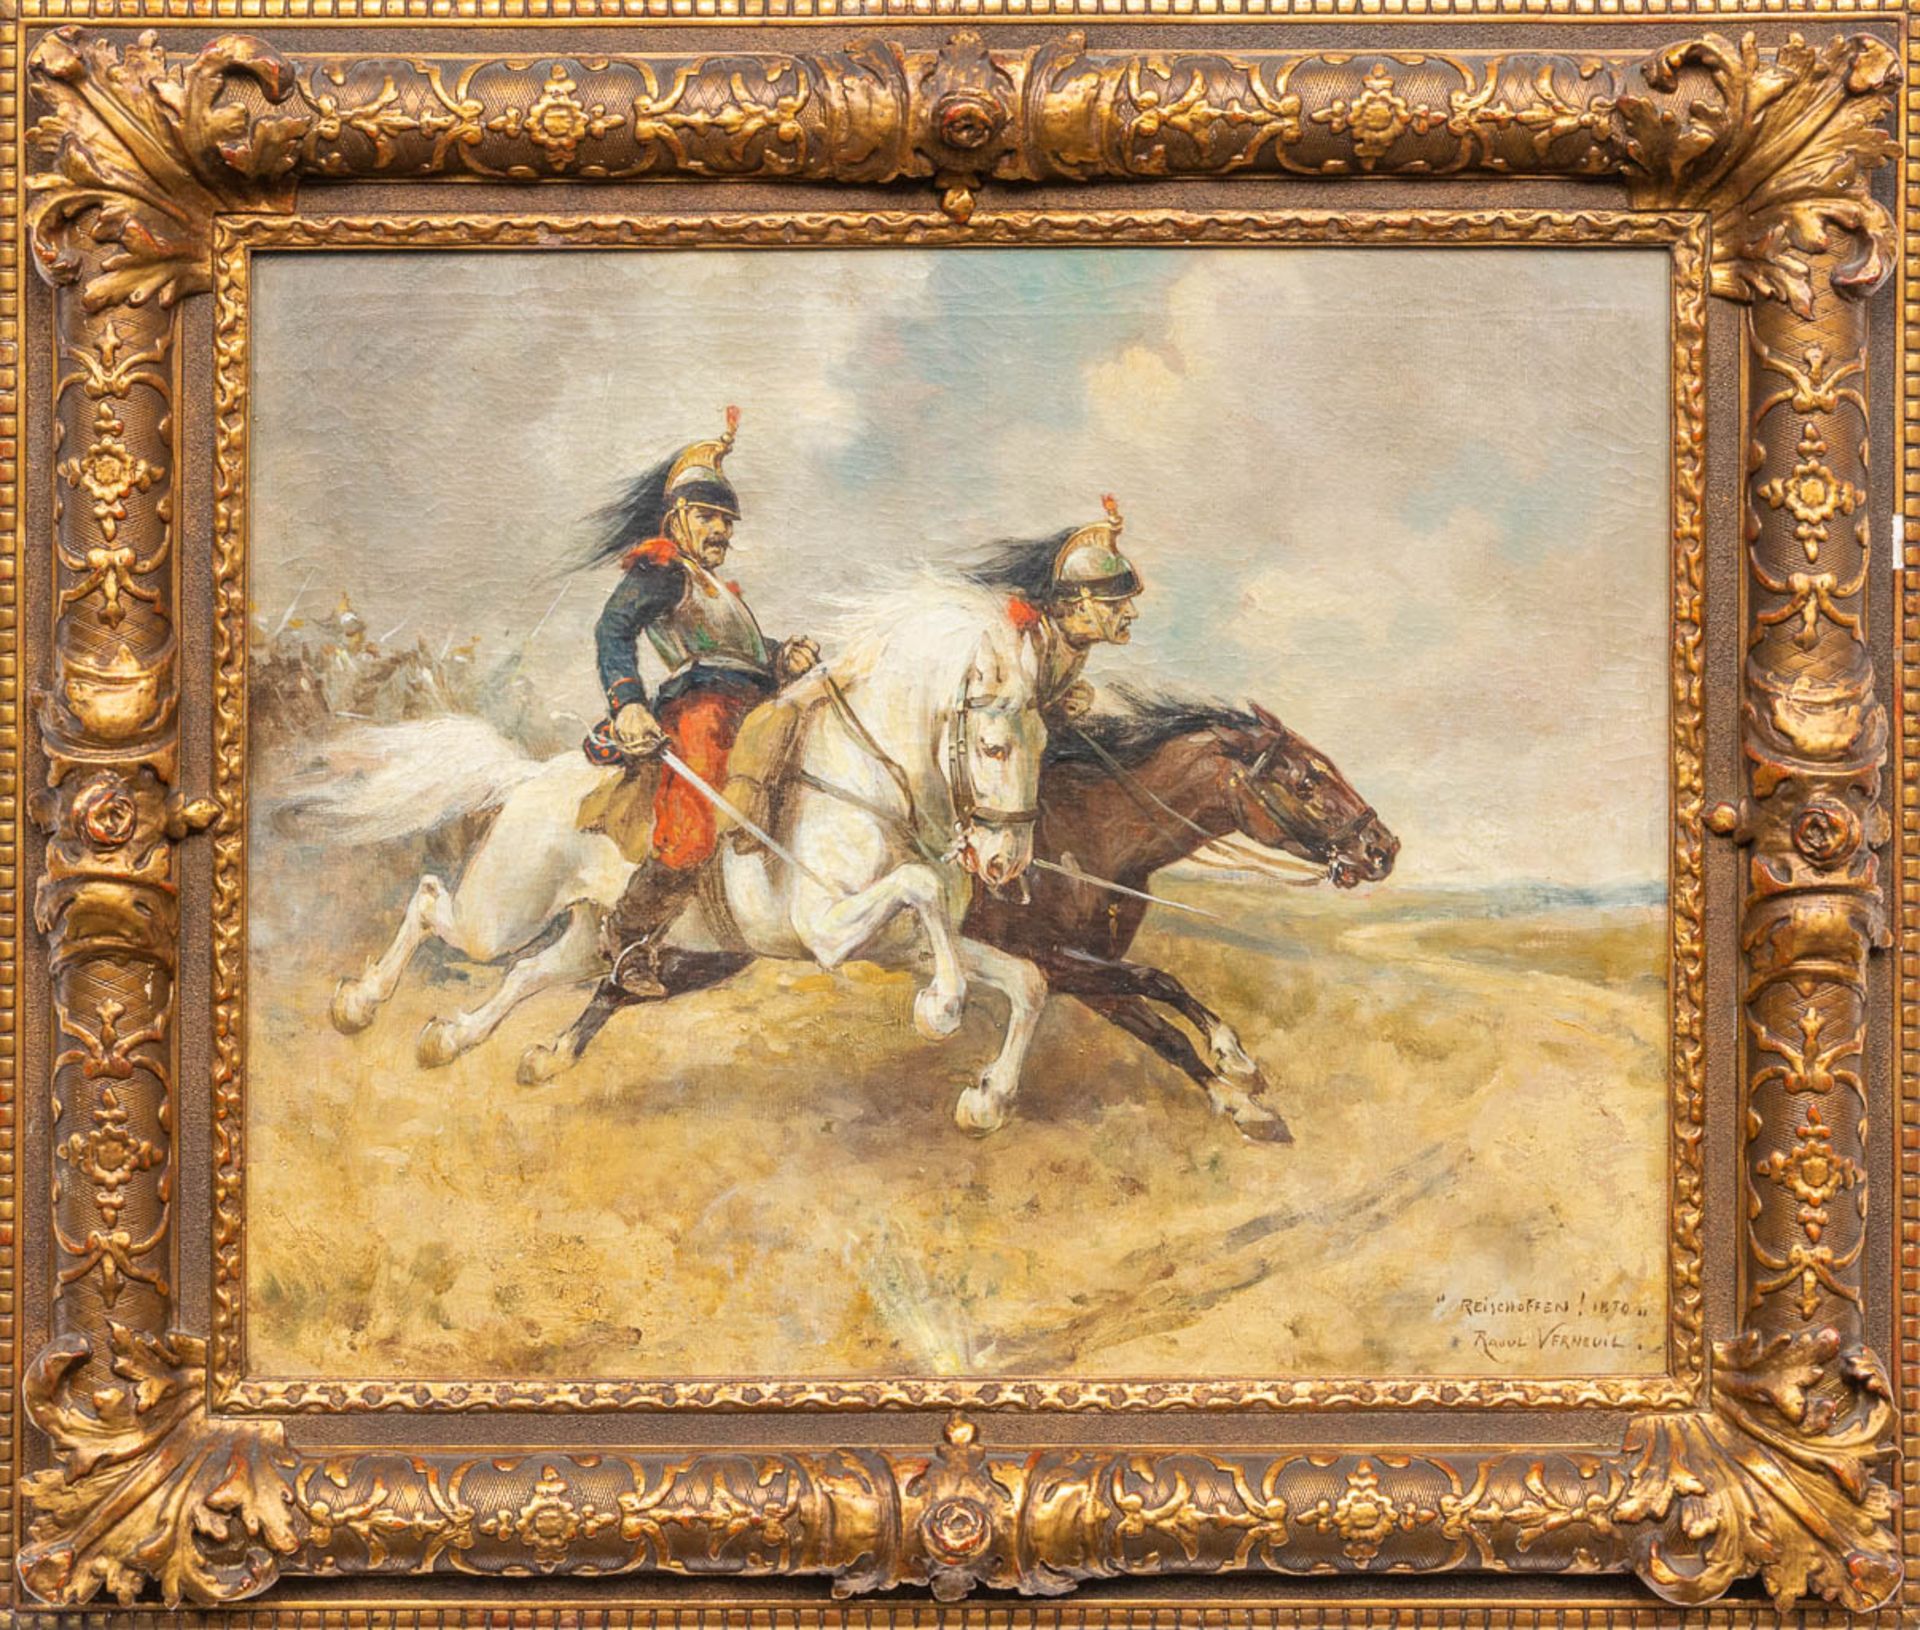 Raoul VERNEUIL (XIX) - painting of the battle of Reischoffen, 1870. Oil on canvas. - Bild 3 aus 5